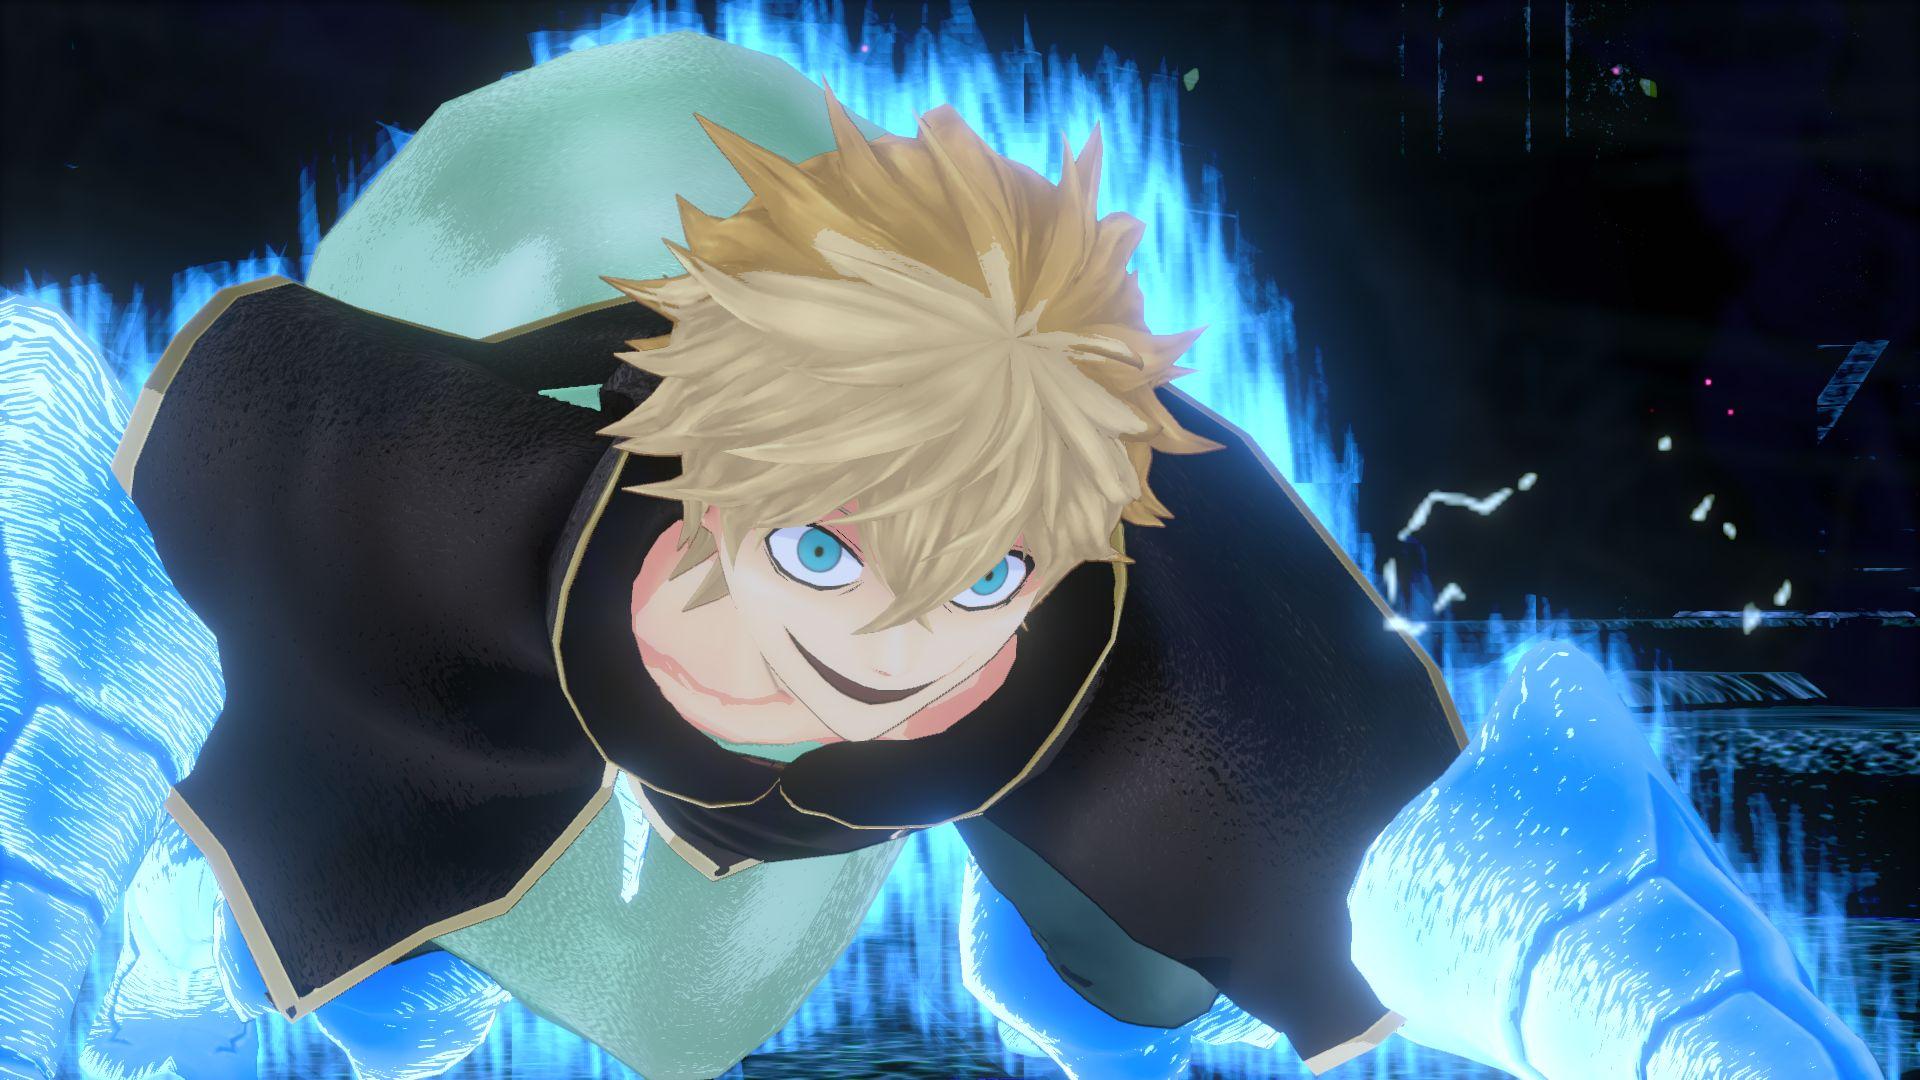 Bandai Namco Will Be Doing an Open Beta for Black Clover